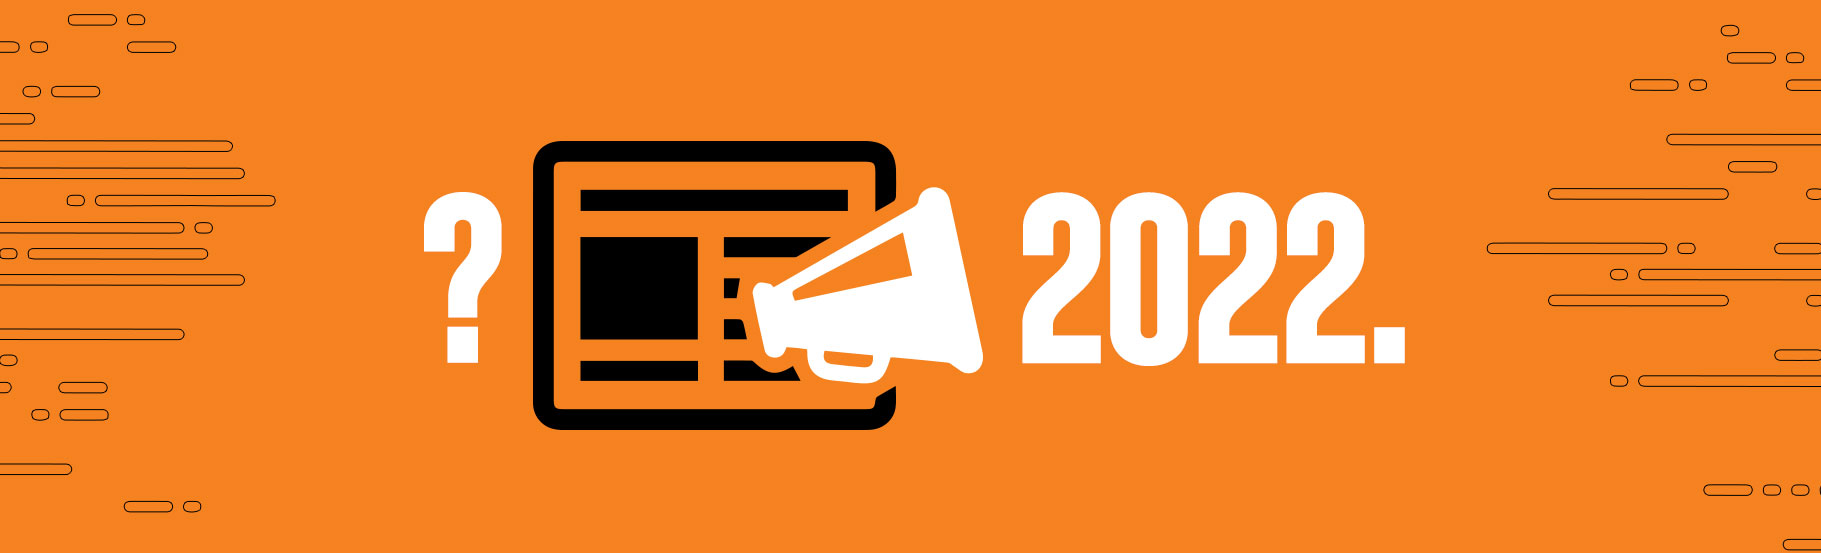 What does content marketing represent in 2020?